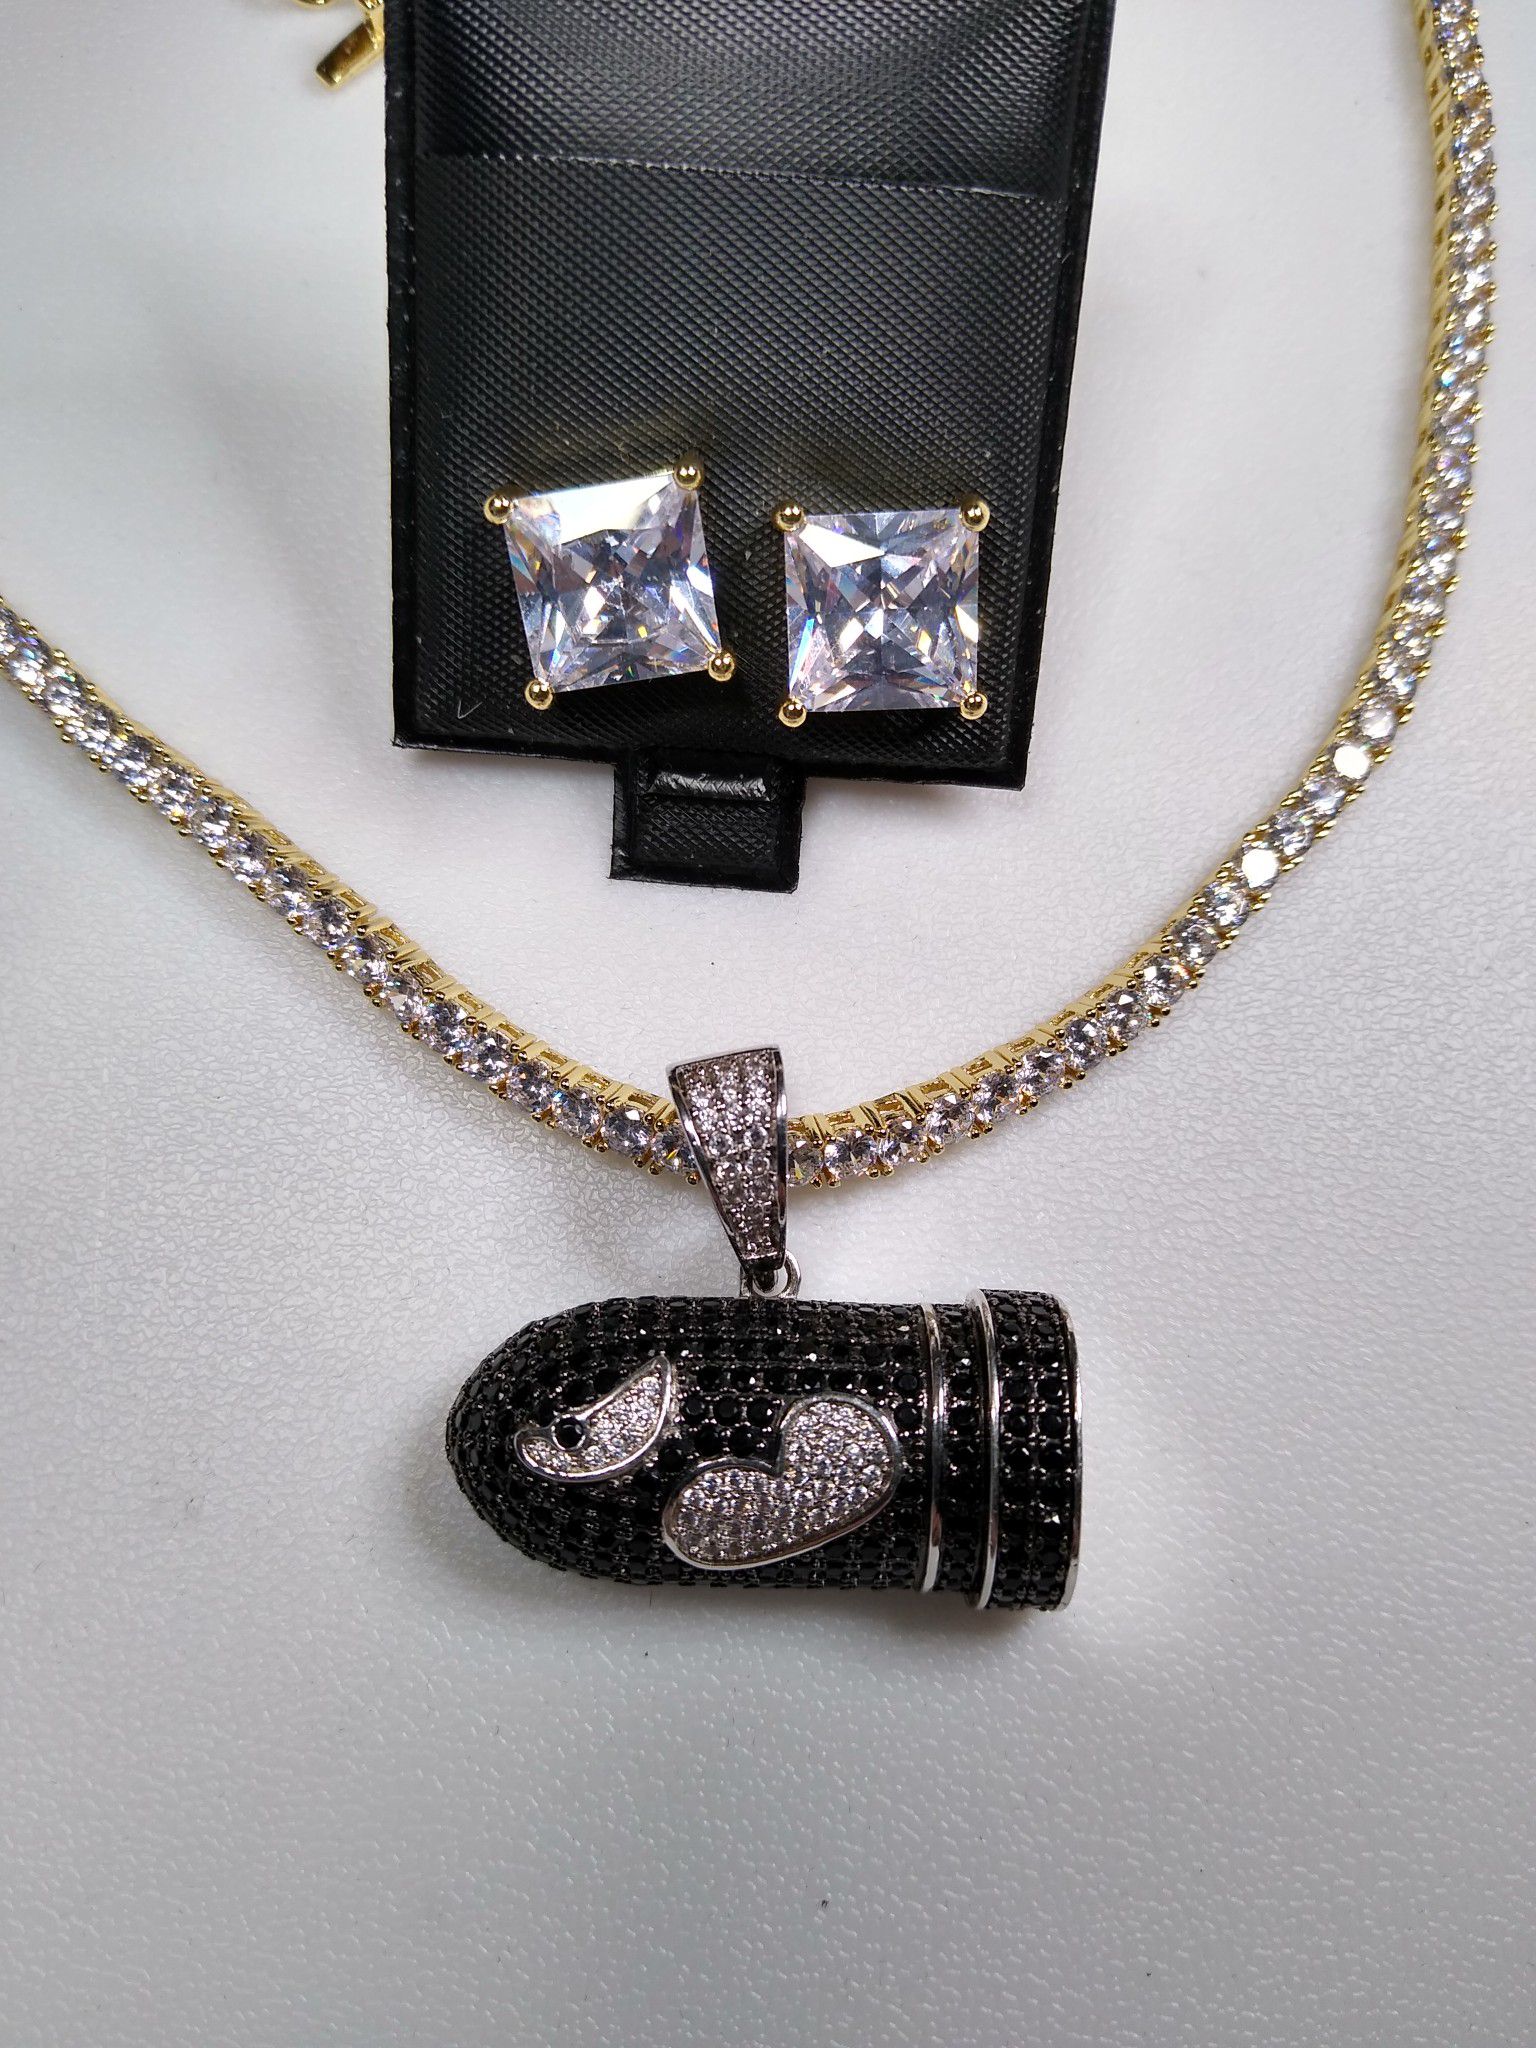 Super Mario Bullet Charm Set Includes Tennis Chain And Earrings High Quality Lab Created Diamonds